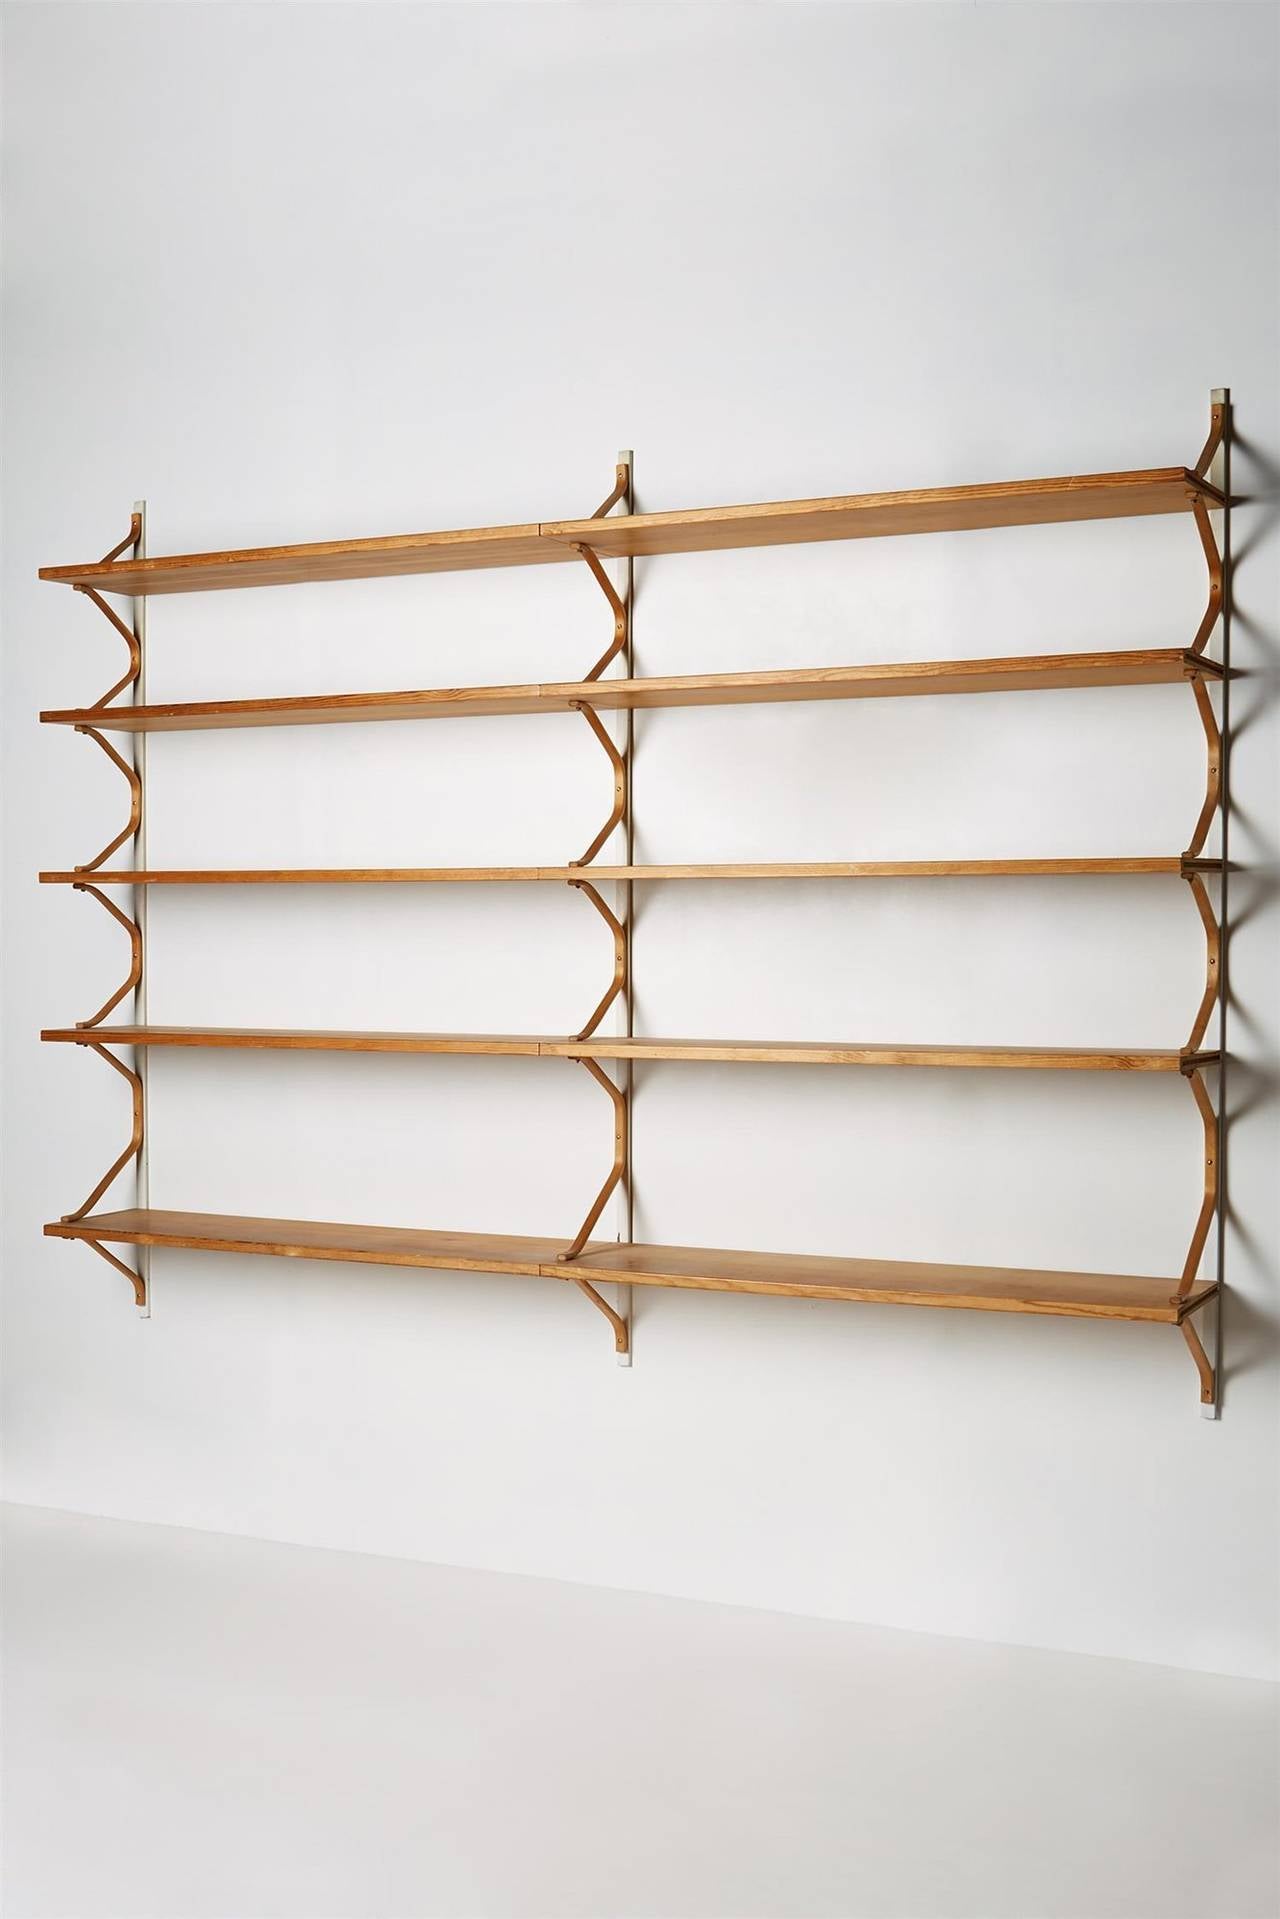 Wall hung bookshelves designed by Bruno Mathsson for Karl Mathsson, Sweden. 1940s.

Lacquered steel and pine.